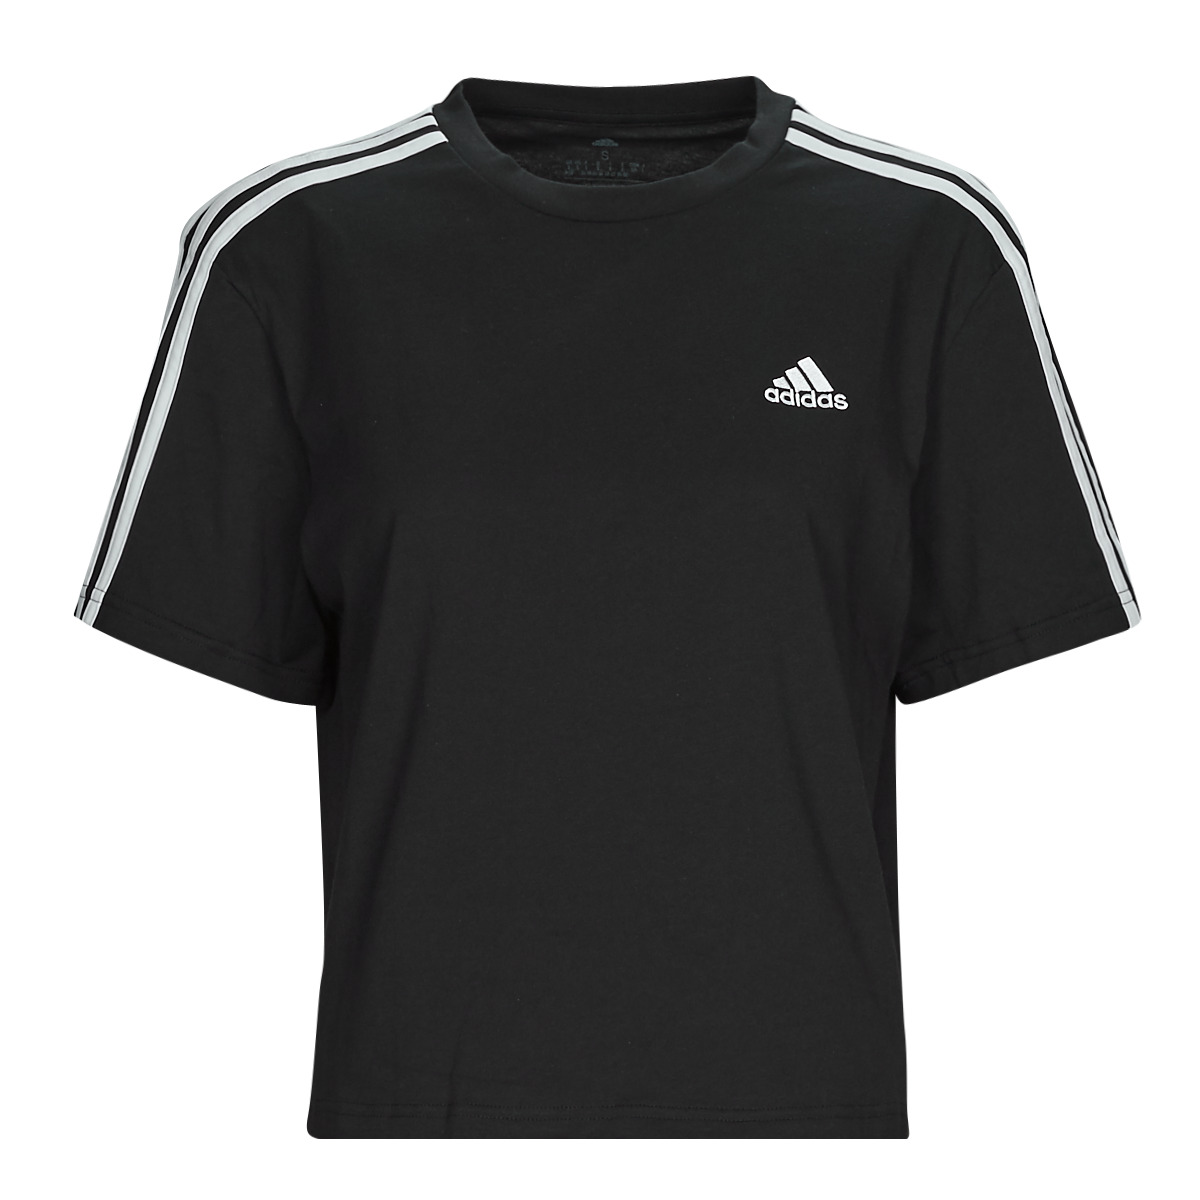 Adidas Sportswear 3S CR TOP t-shirts ! - short-sleeved Spartoo - Black | Fast Women Europe € delivery 24,80 Clothing